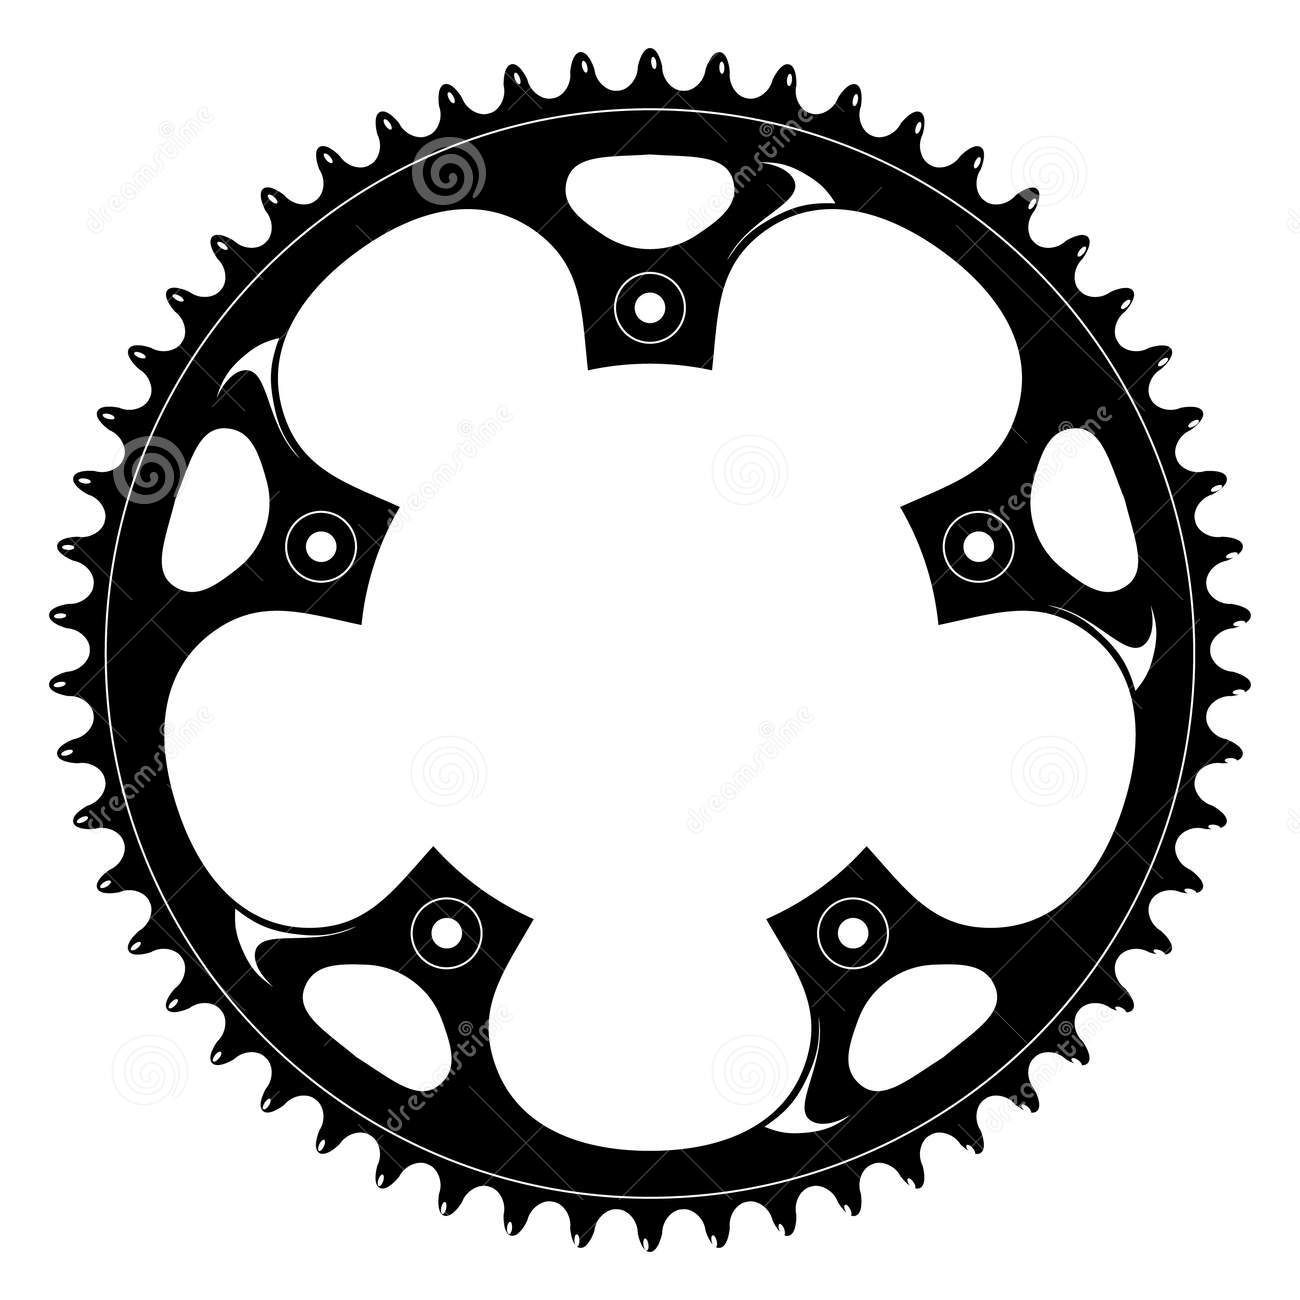 Gears clipart bicycle.